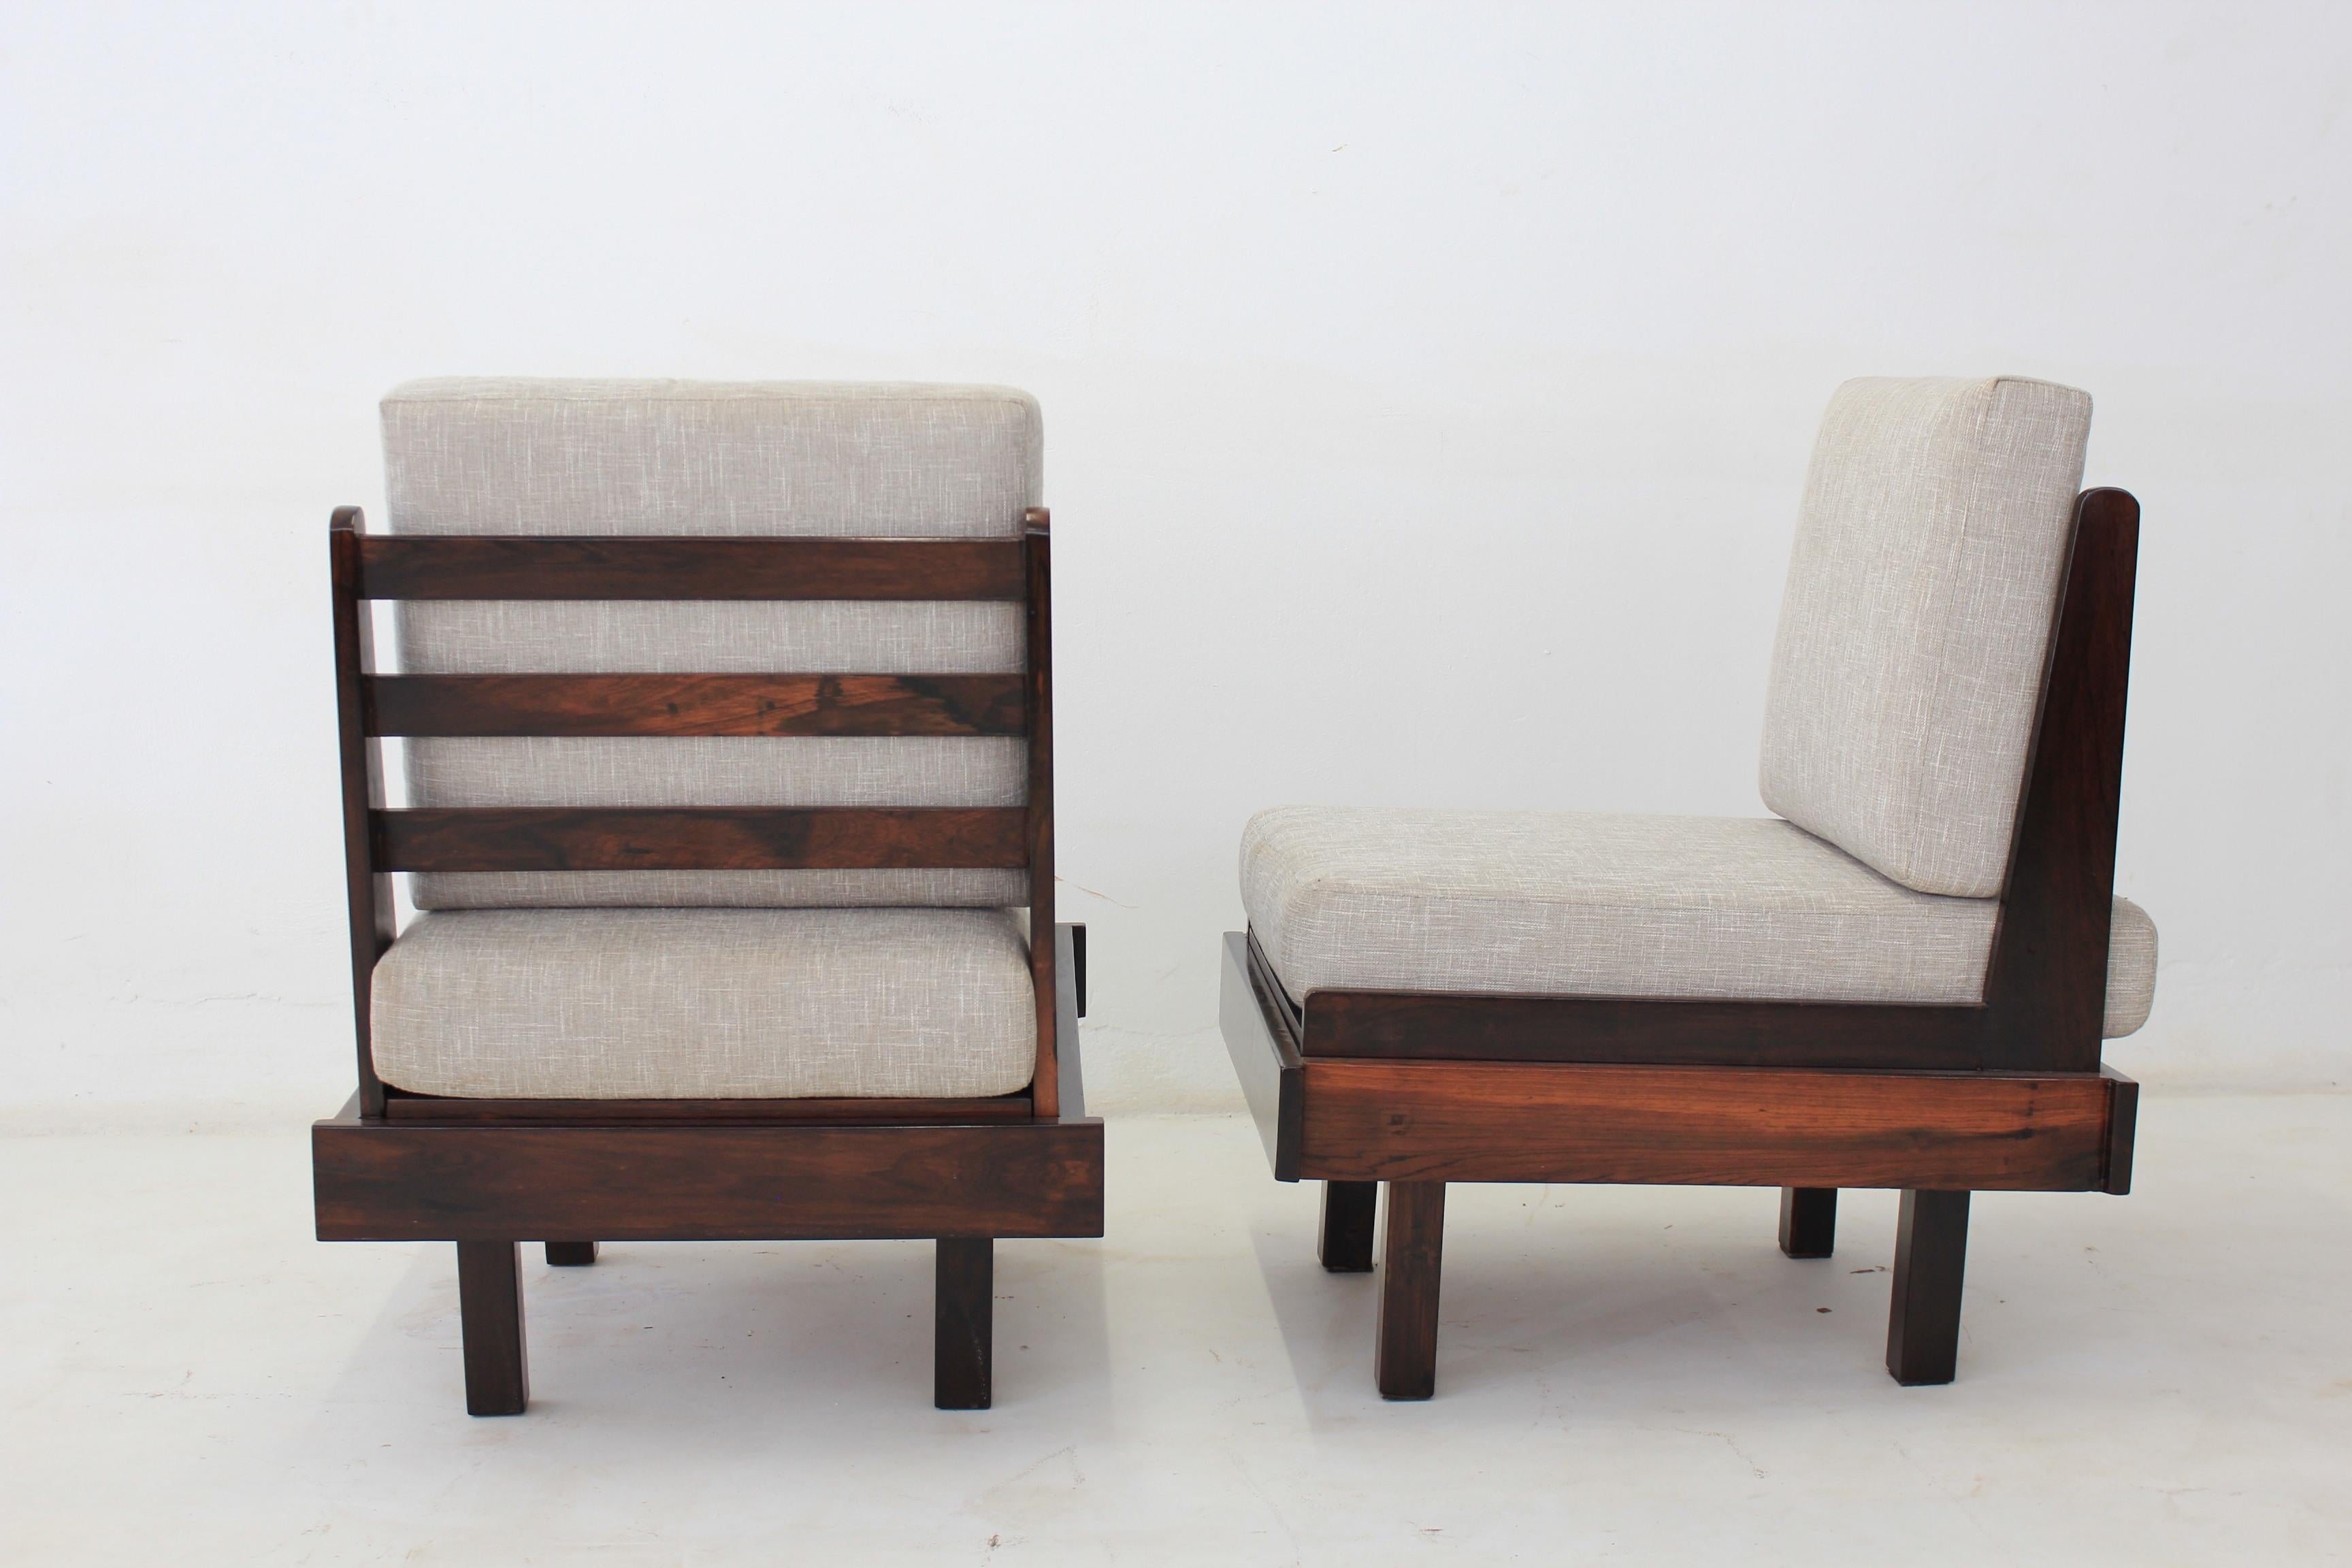 Pair of armchair in Brazilian rosewood by Celina Moveis.